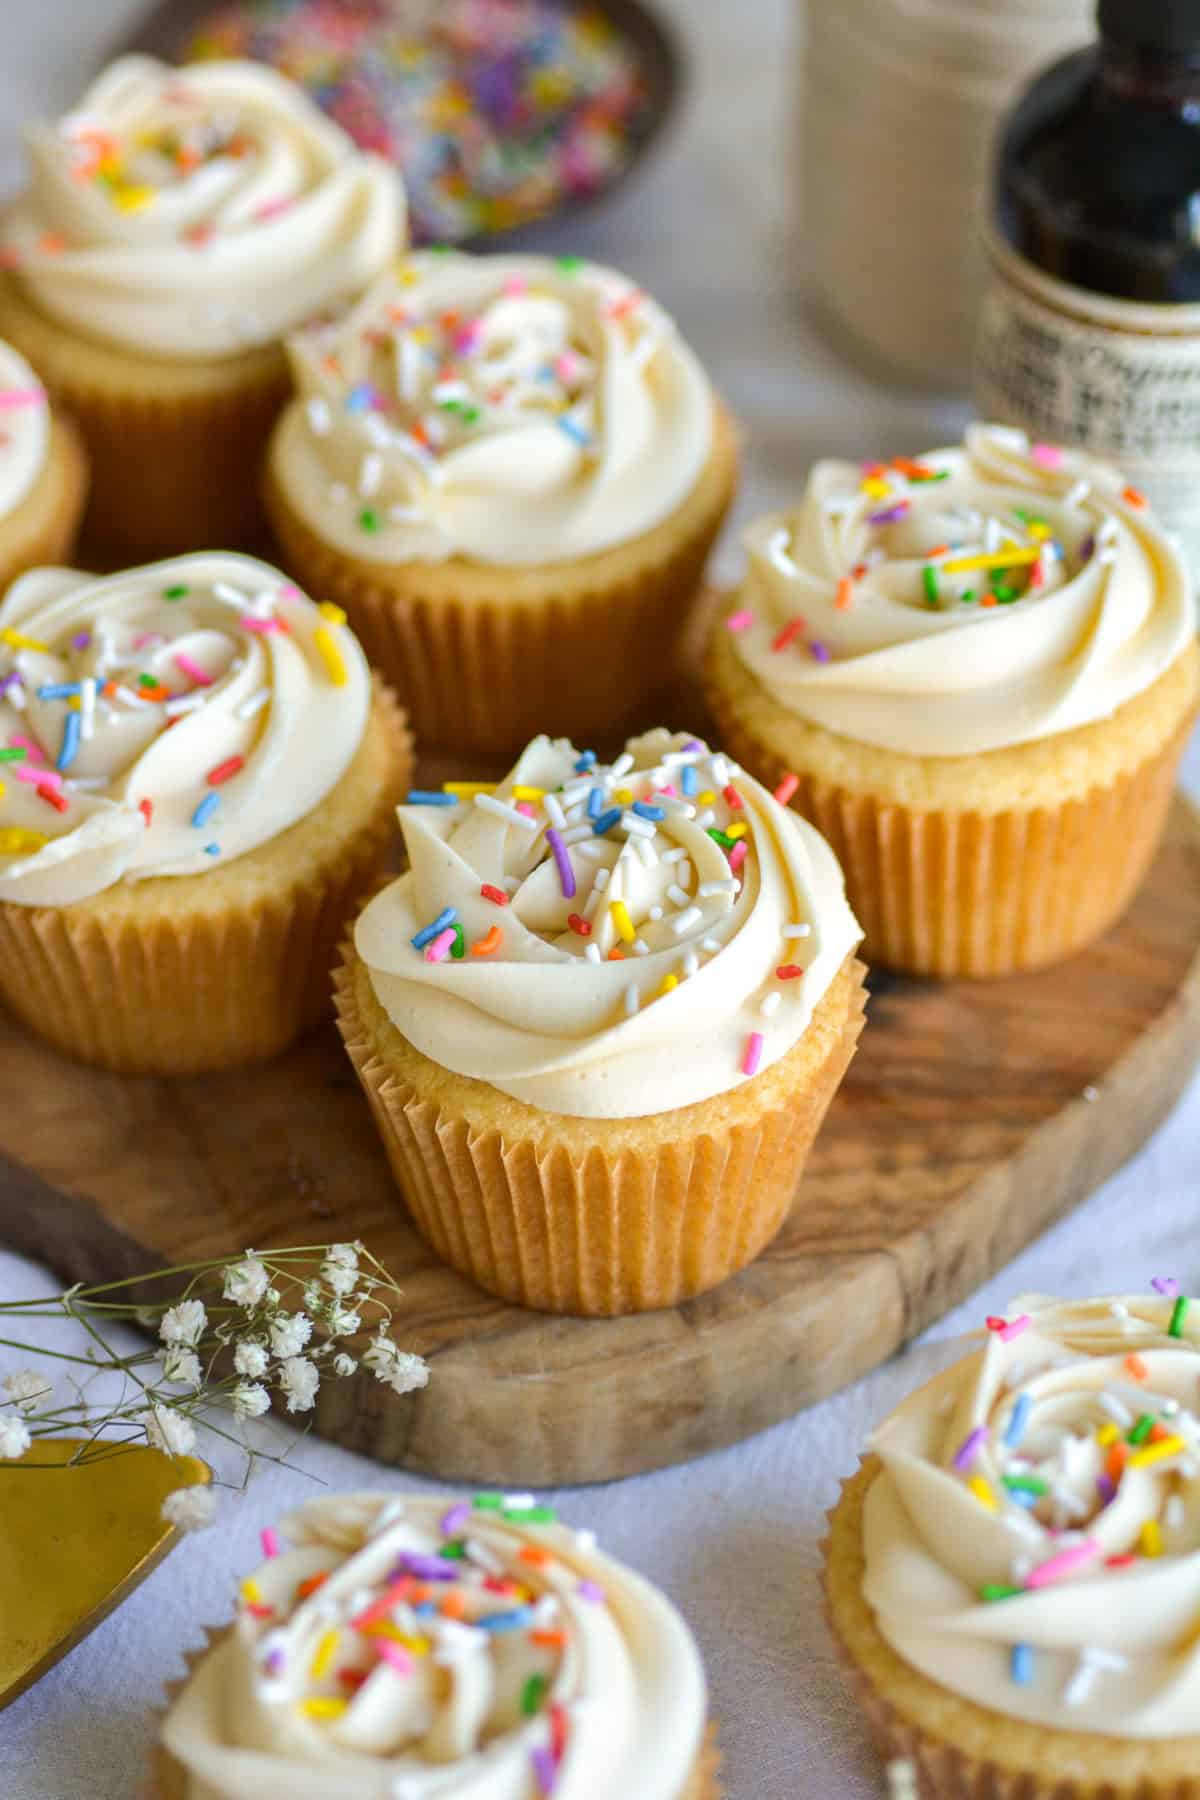 Vegan Vanilla Cupcakes topped with rainbow sprinkles on a small wooden board with cupcakes in the foreground.